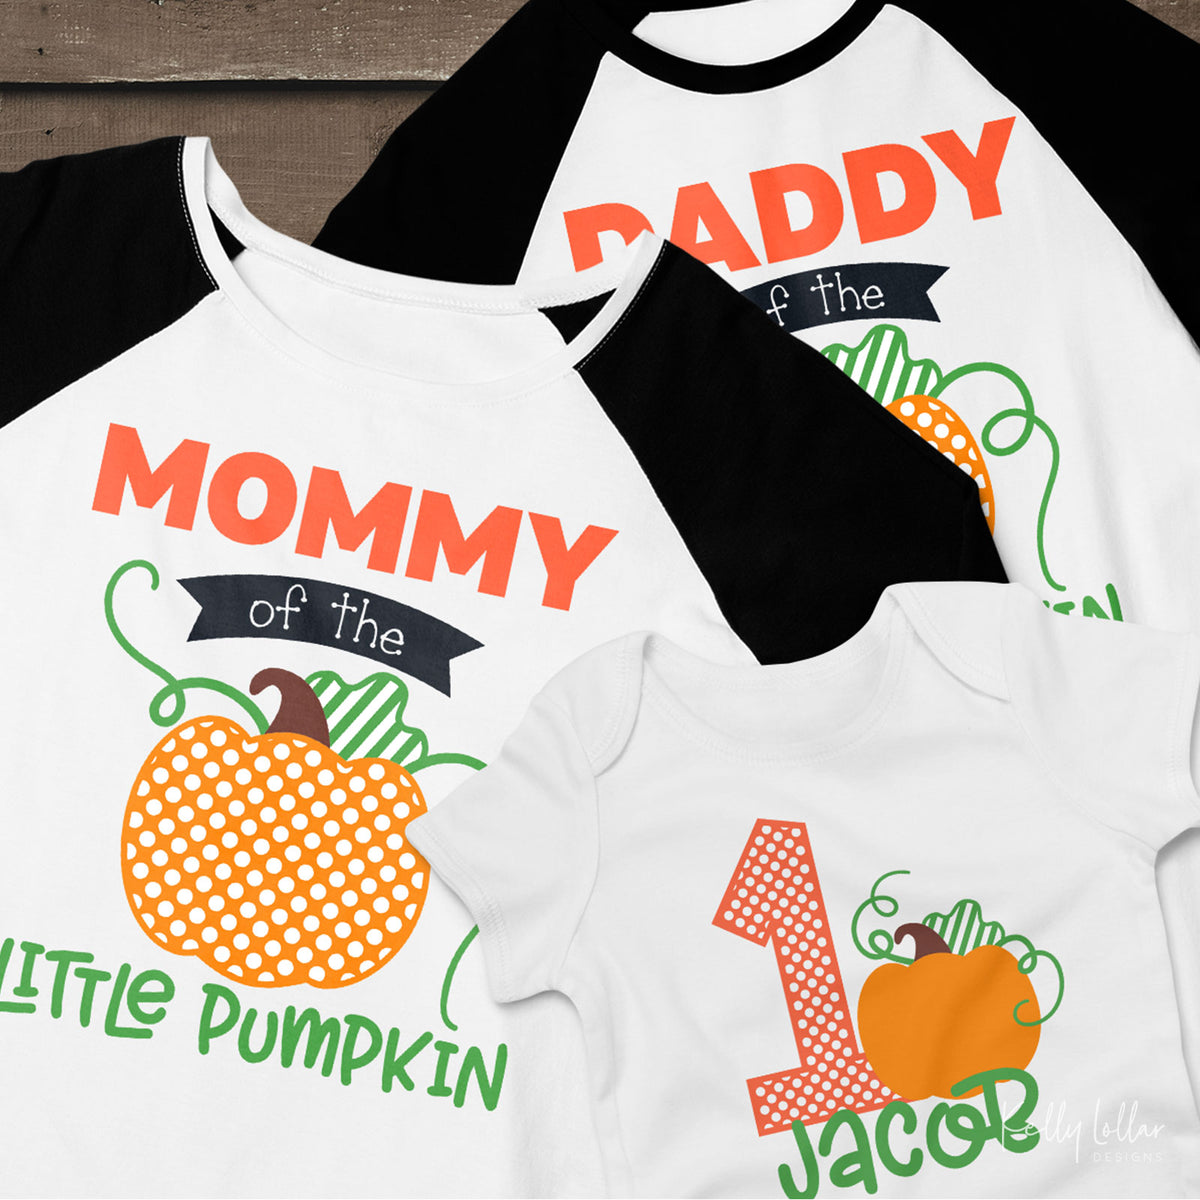 Little Pumpkin Birthday Set | Baby &amp; Toddler Fall Birthday Sets with Matching Mommy and Daddy Shirt Designs  | SVG DXF PNG Cut Files